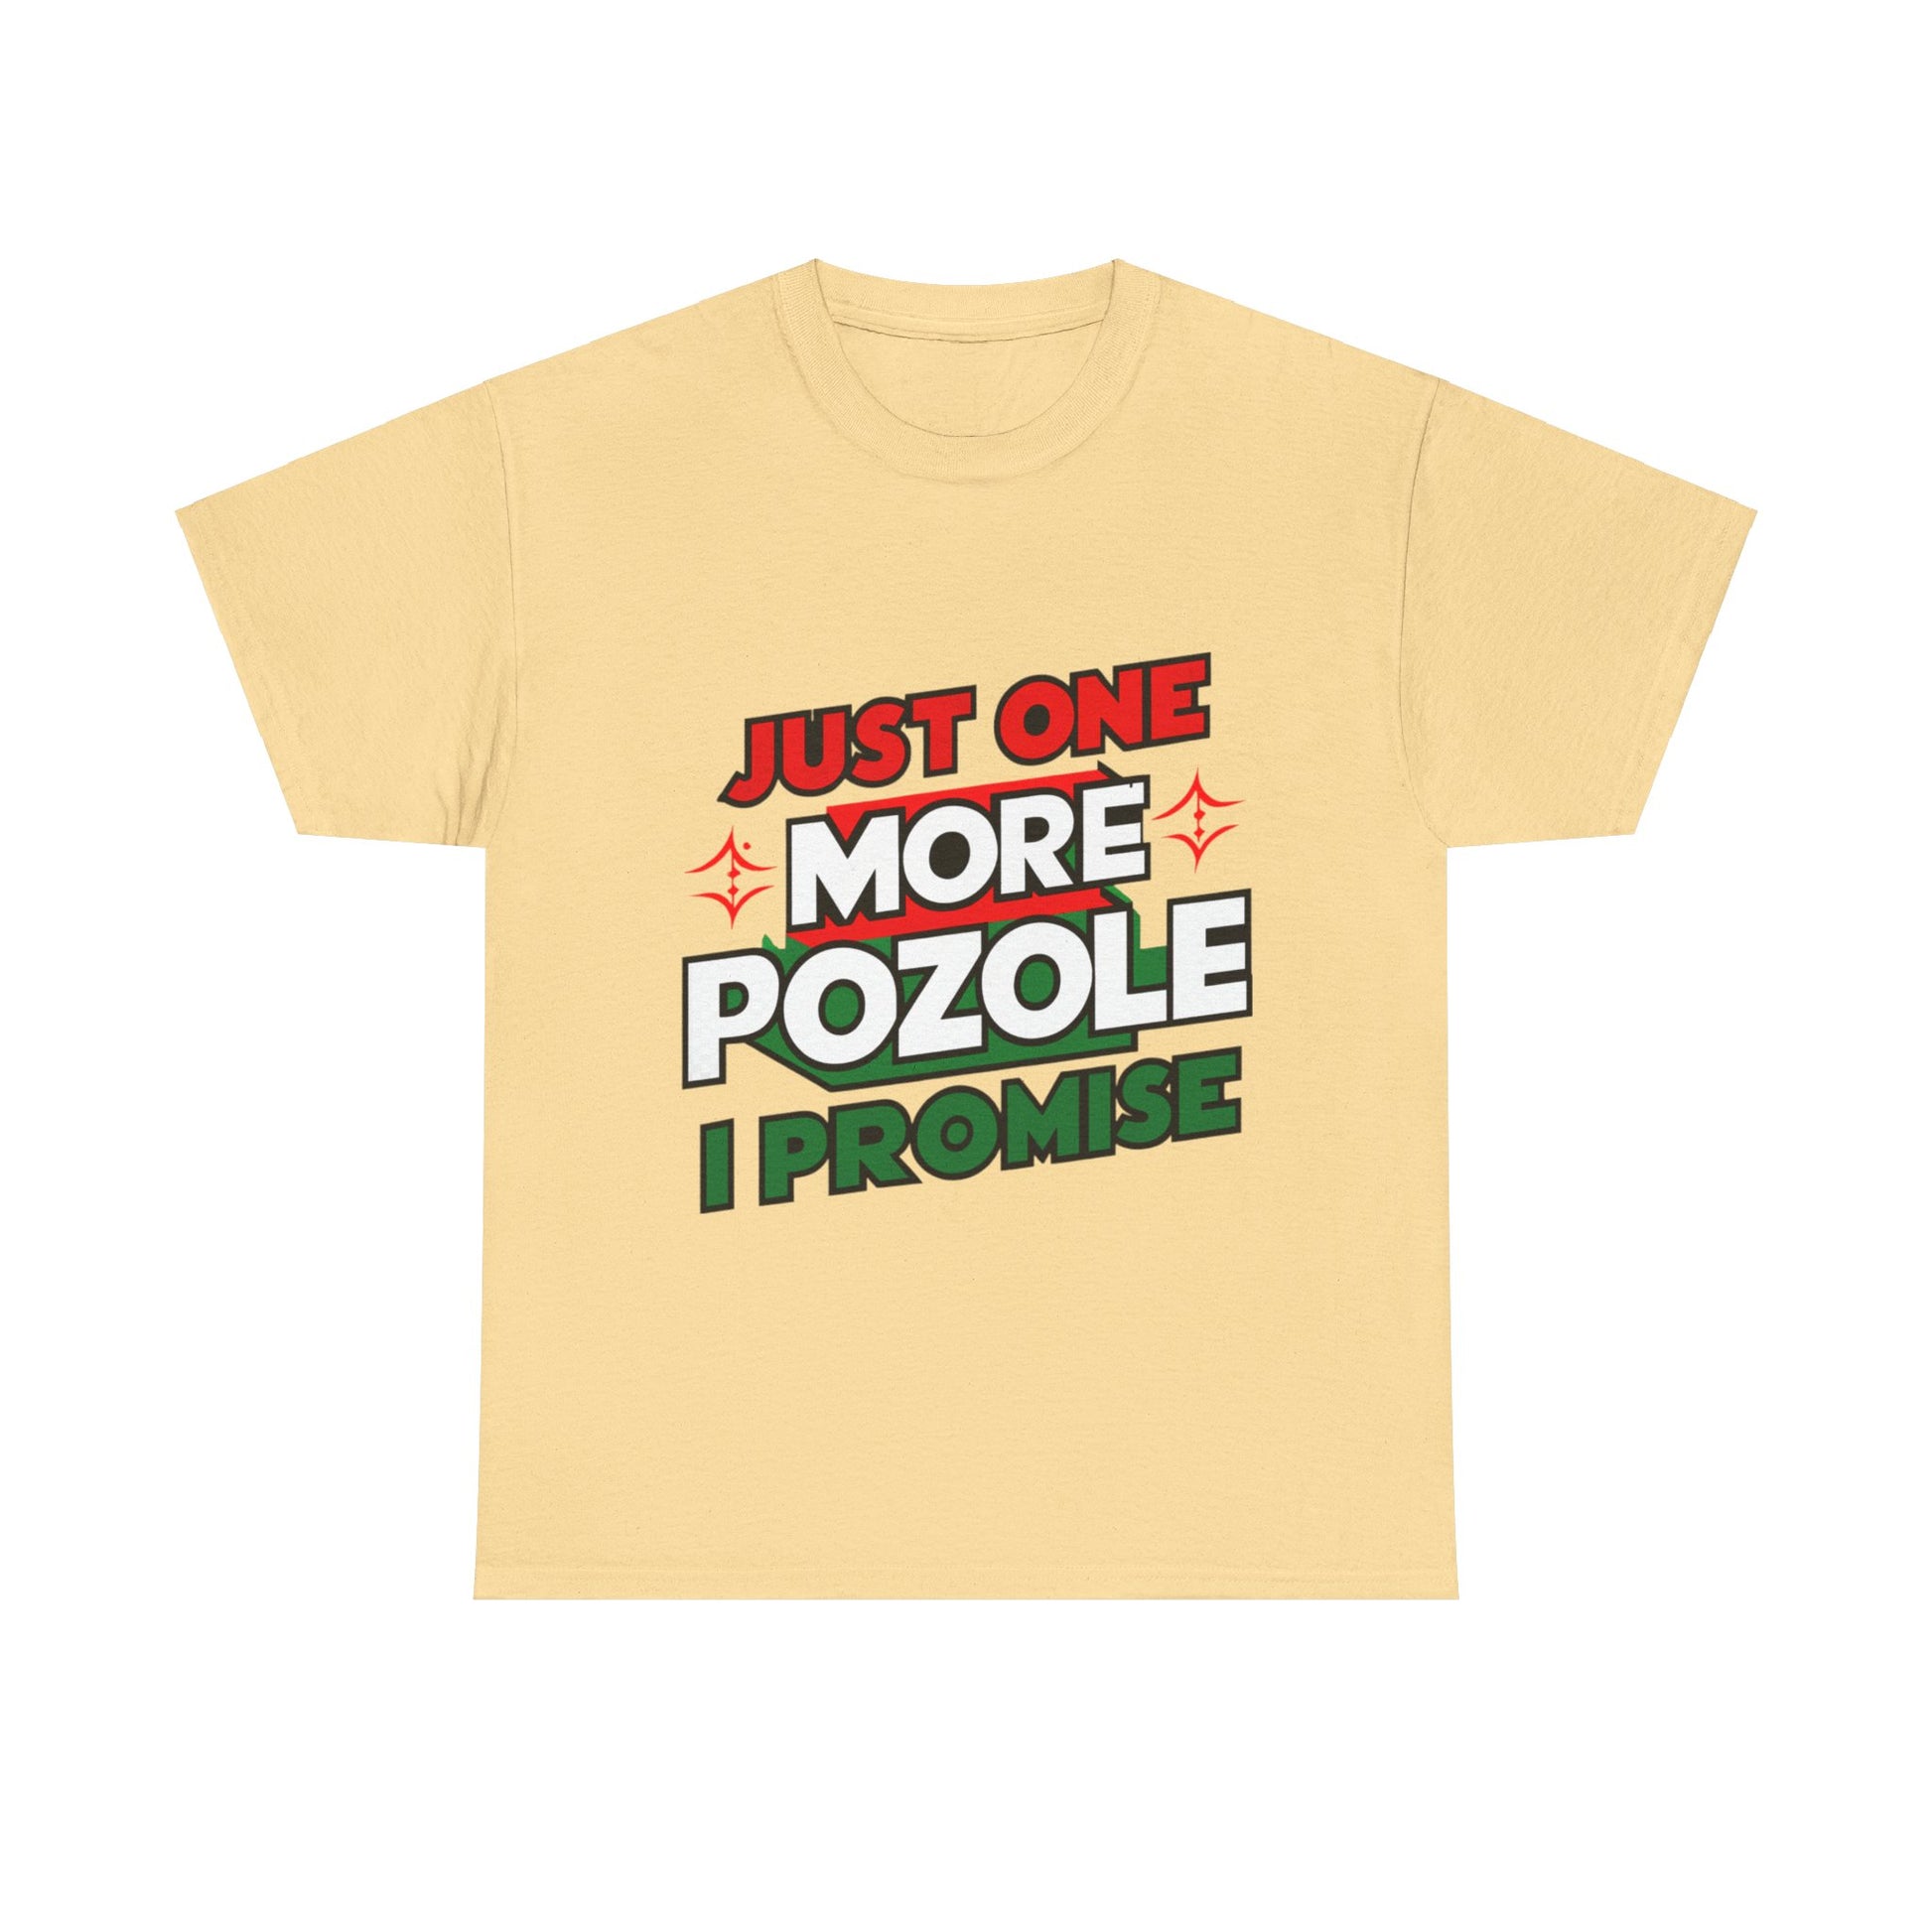 Just One More Pozole I Promise Mexican Food Graphic Unisex Heavy Cotton Tee Cotton Funny Humorous Graphic Soft Premium Unisex Men Women Yellow Haze T-shirt Birthday Gift-11